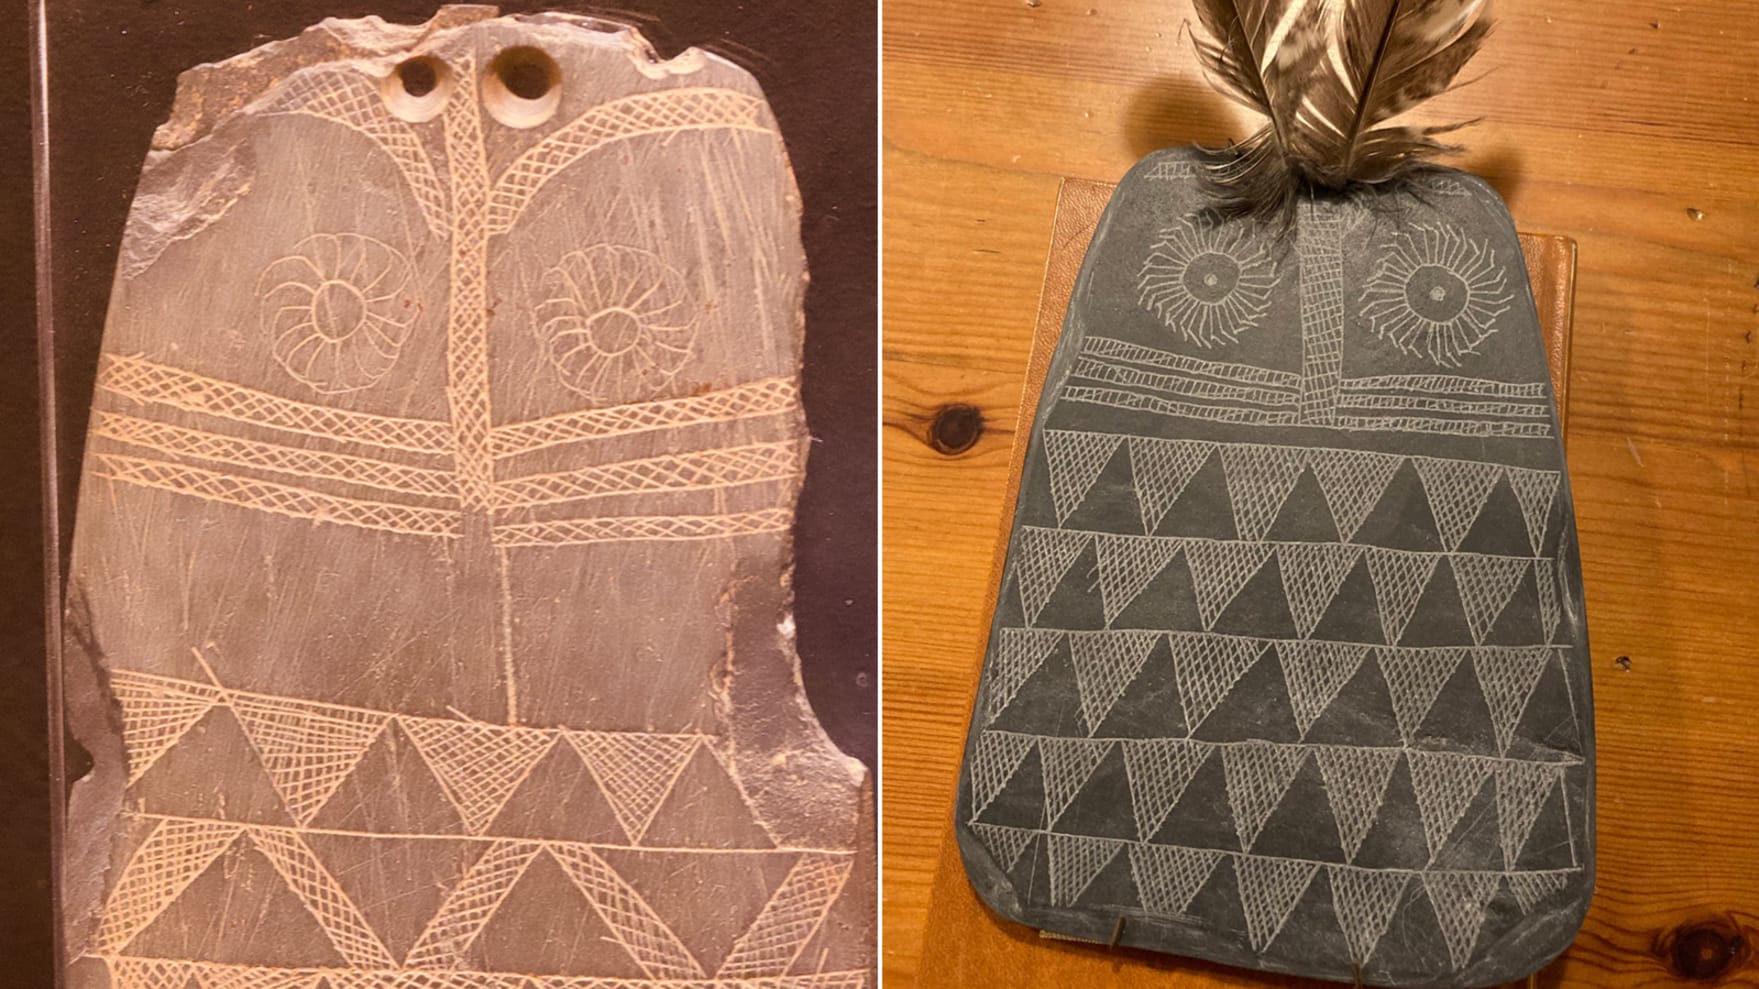 Original slate plaque modeled after an owl in the Museo de Huelva. Replica of the Valencina Slate Plaque with inserted owl feathers on the two drilled holes at the top of the plaque. 